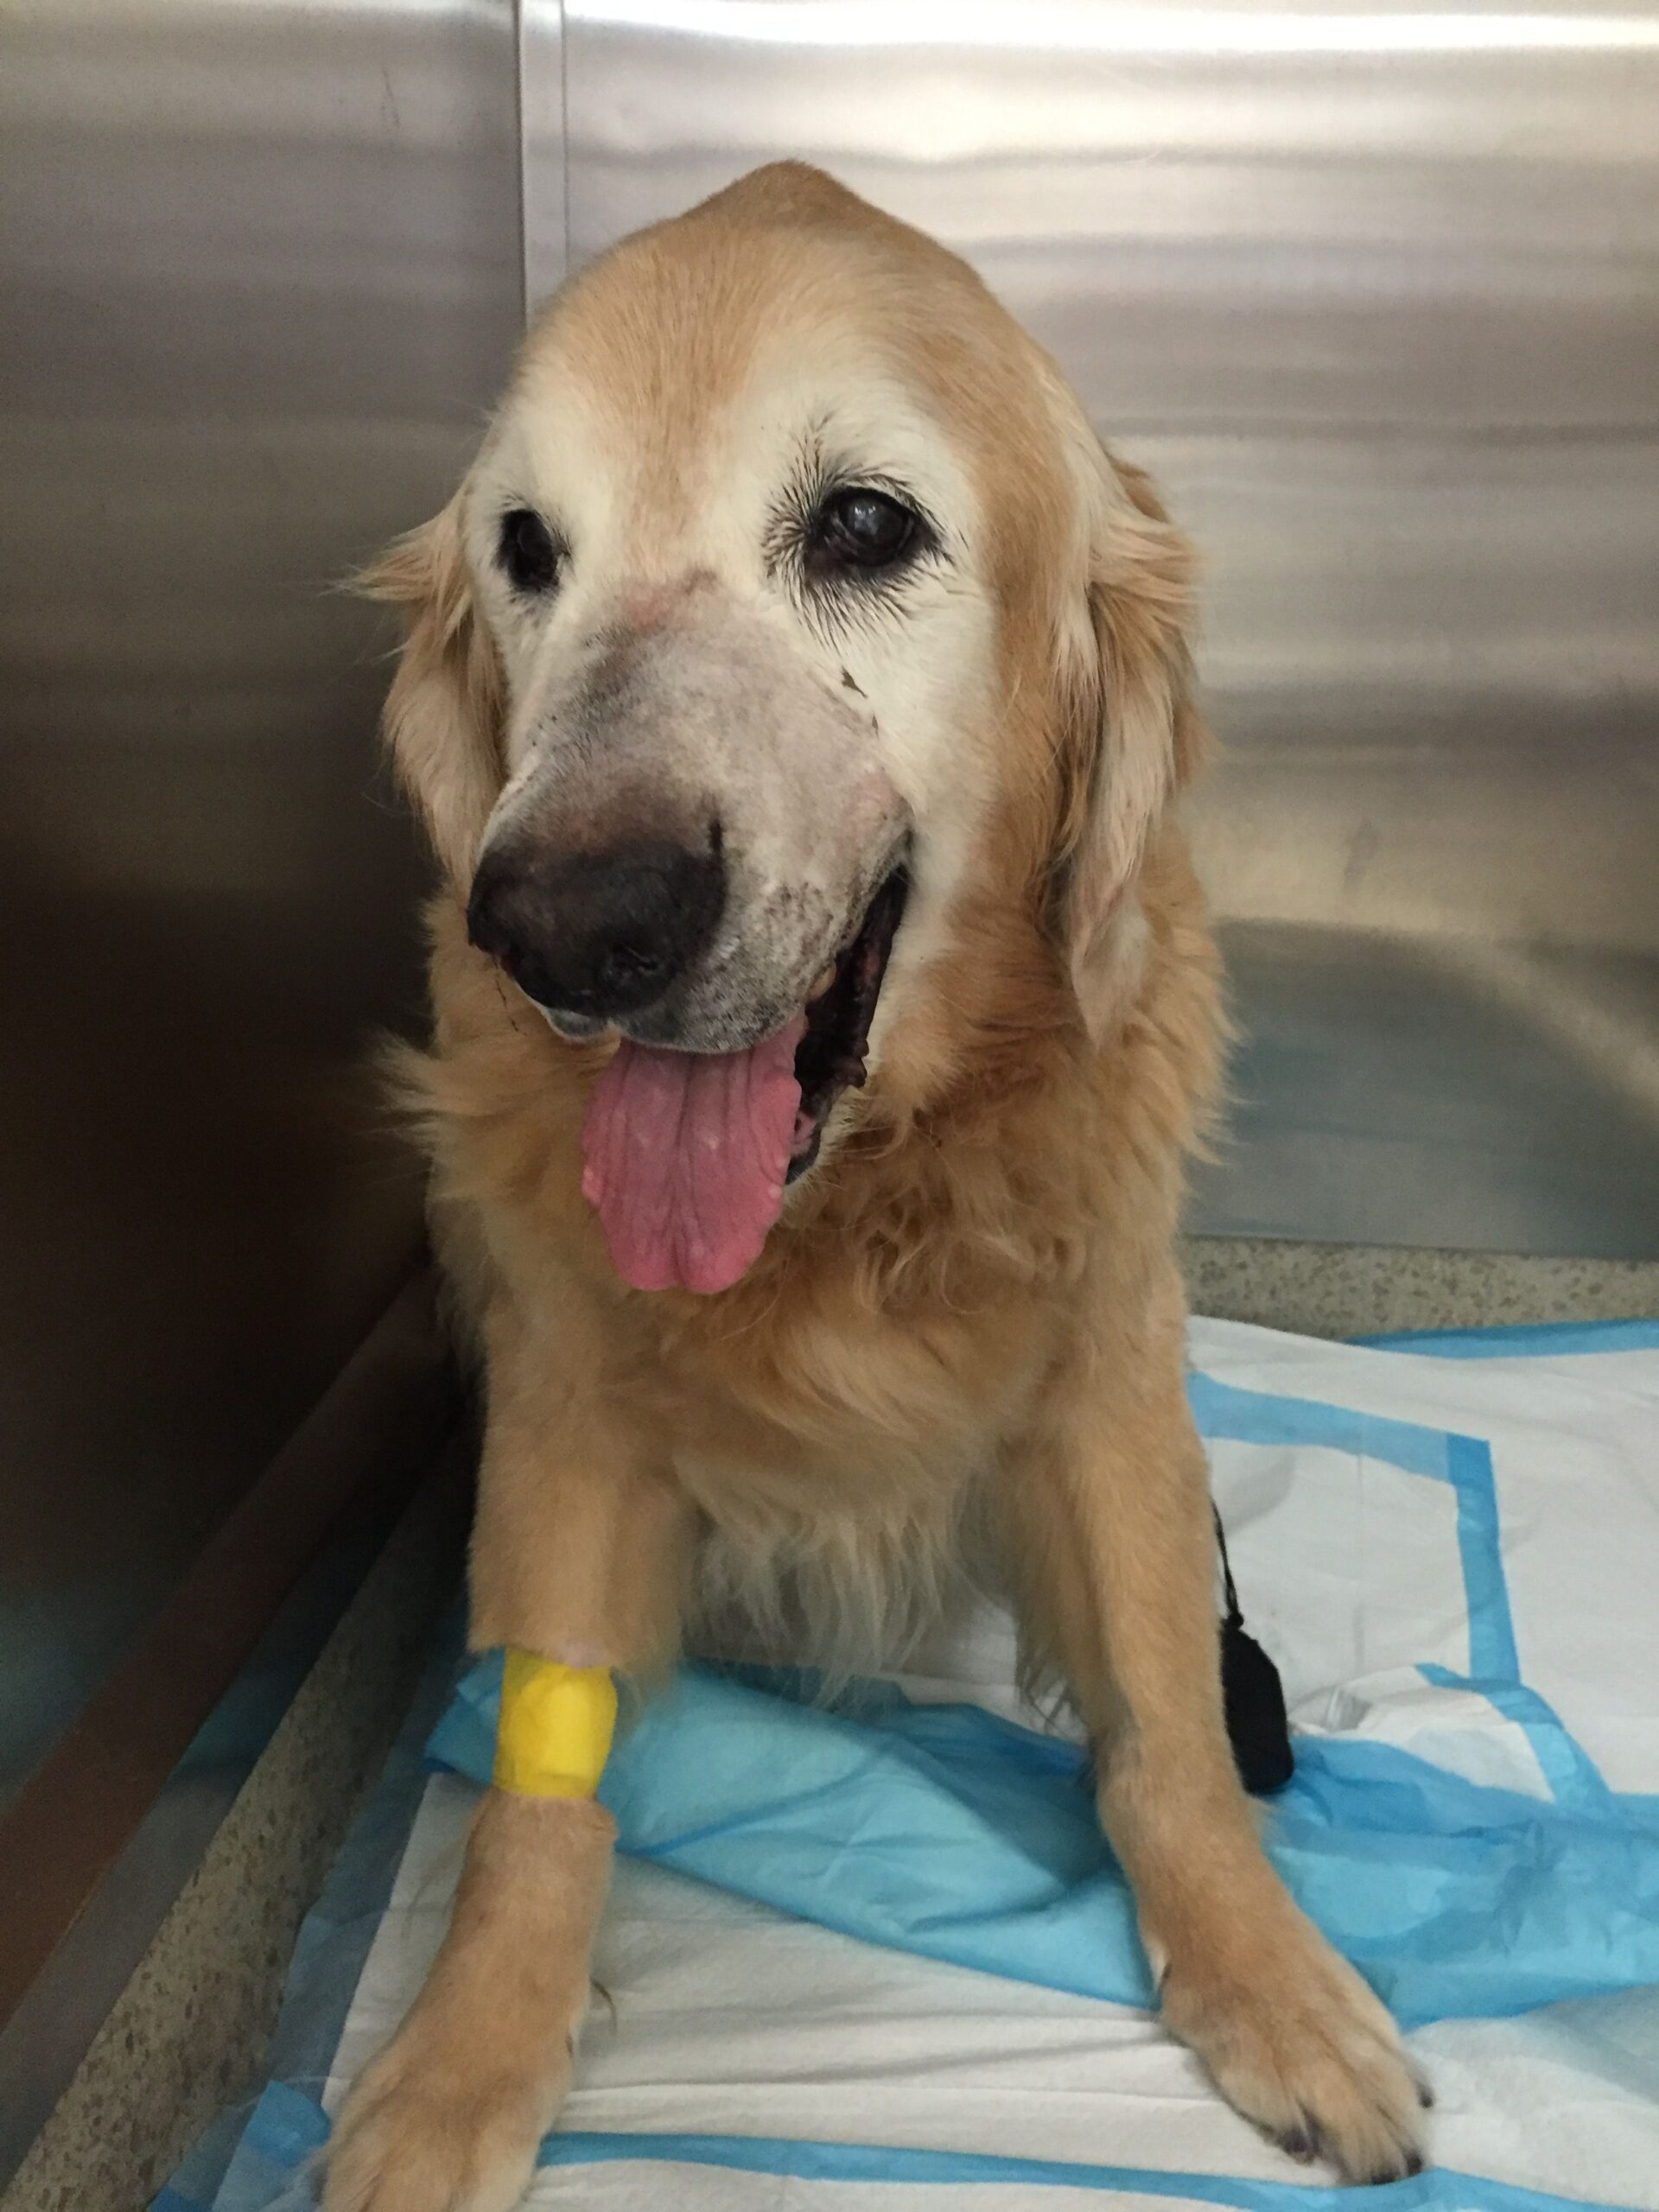 Berkeley the looking happy after surgery with nose shaved